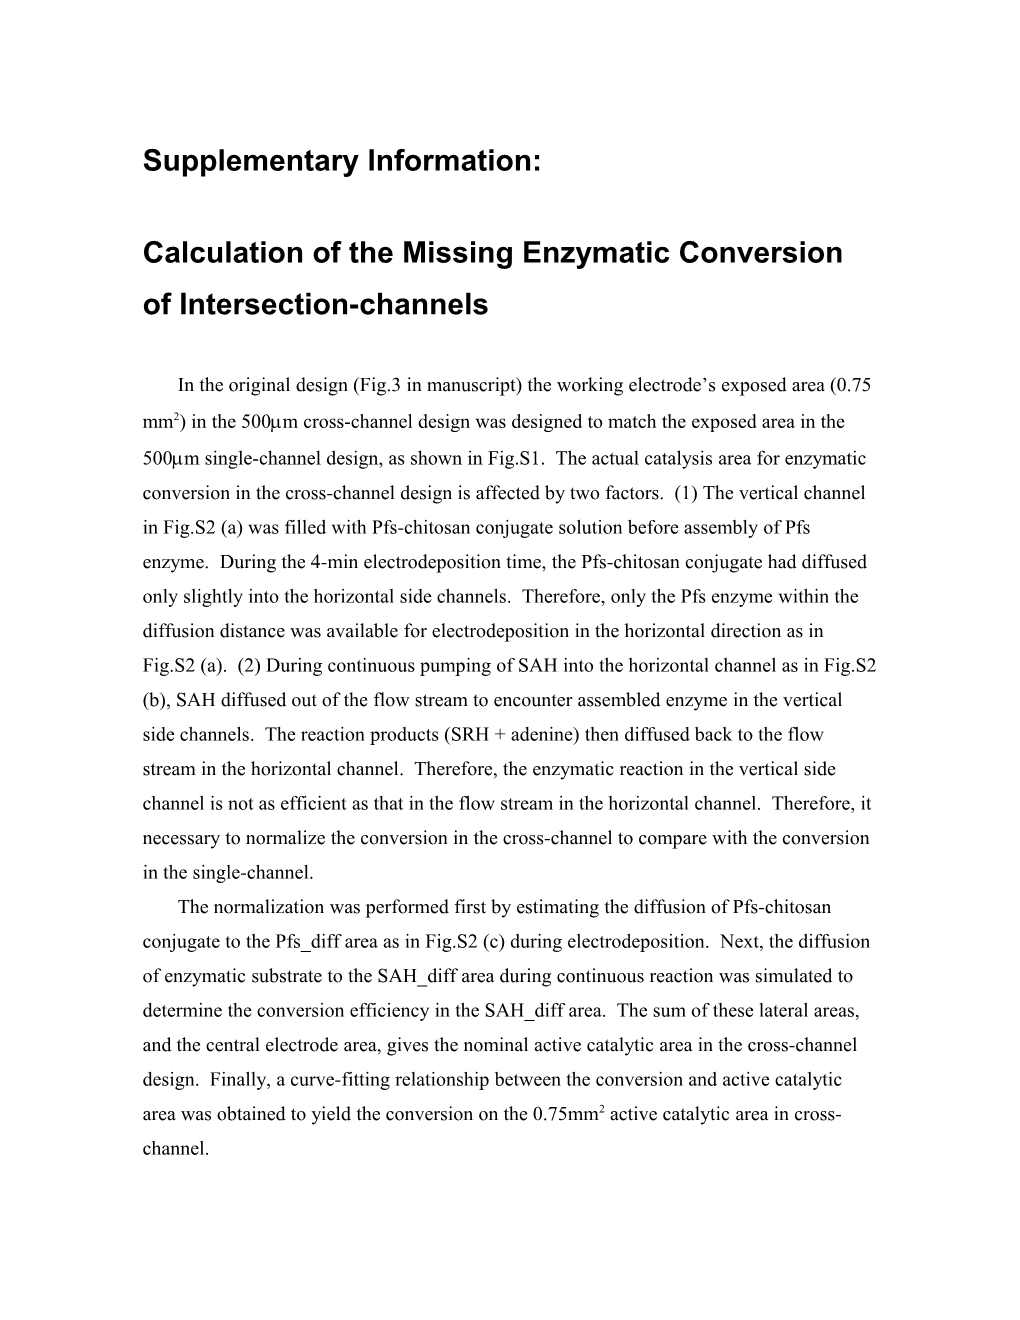 Calculation of the Missing Enzymatic Conversion of Intersection-Channels